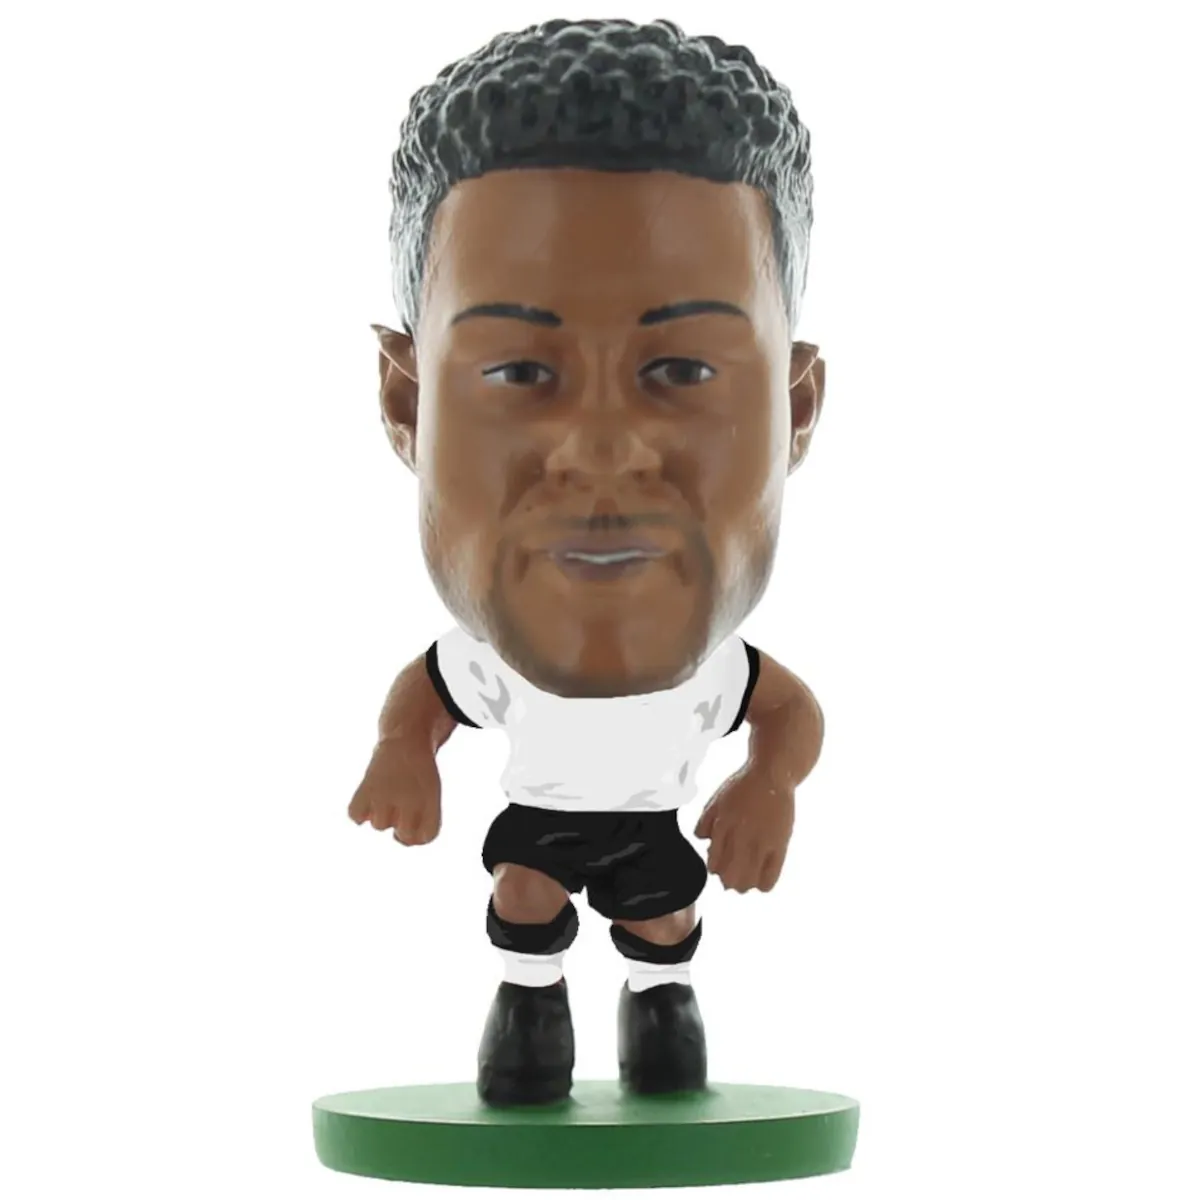 173477 Germany SoccerStarz Collectable Figure - Serge Gnabry